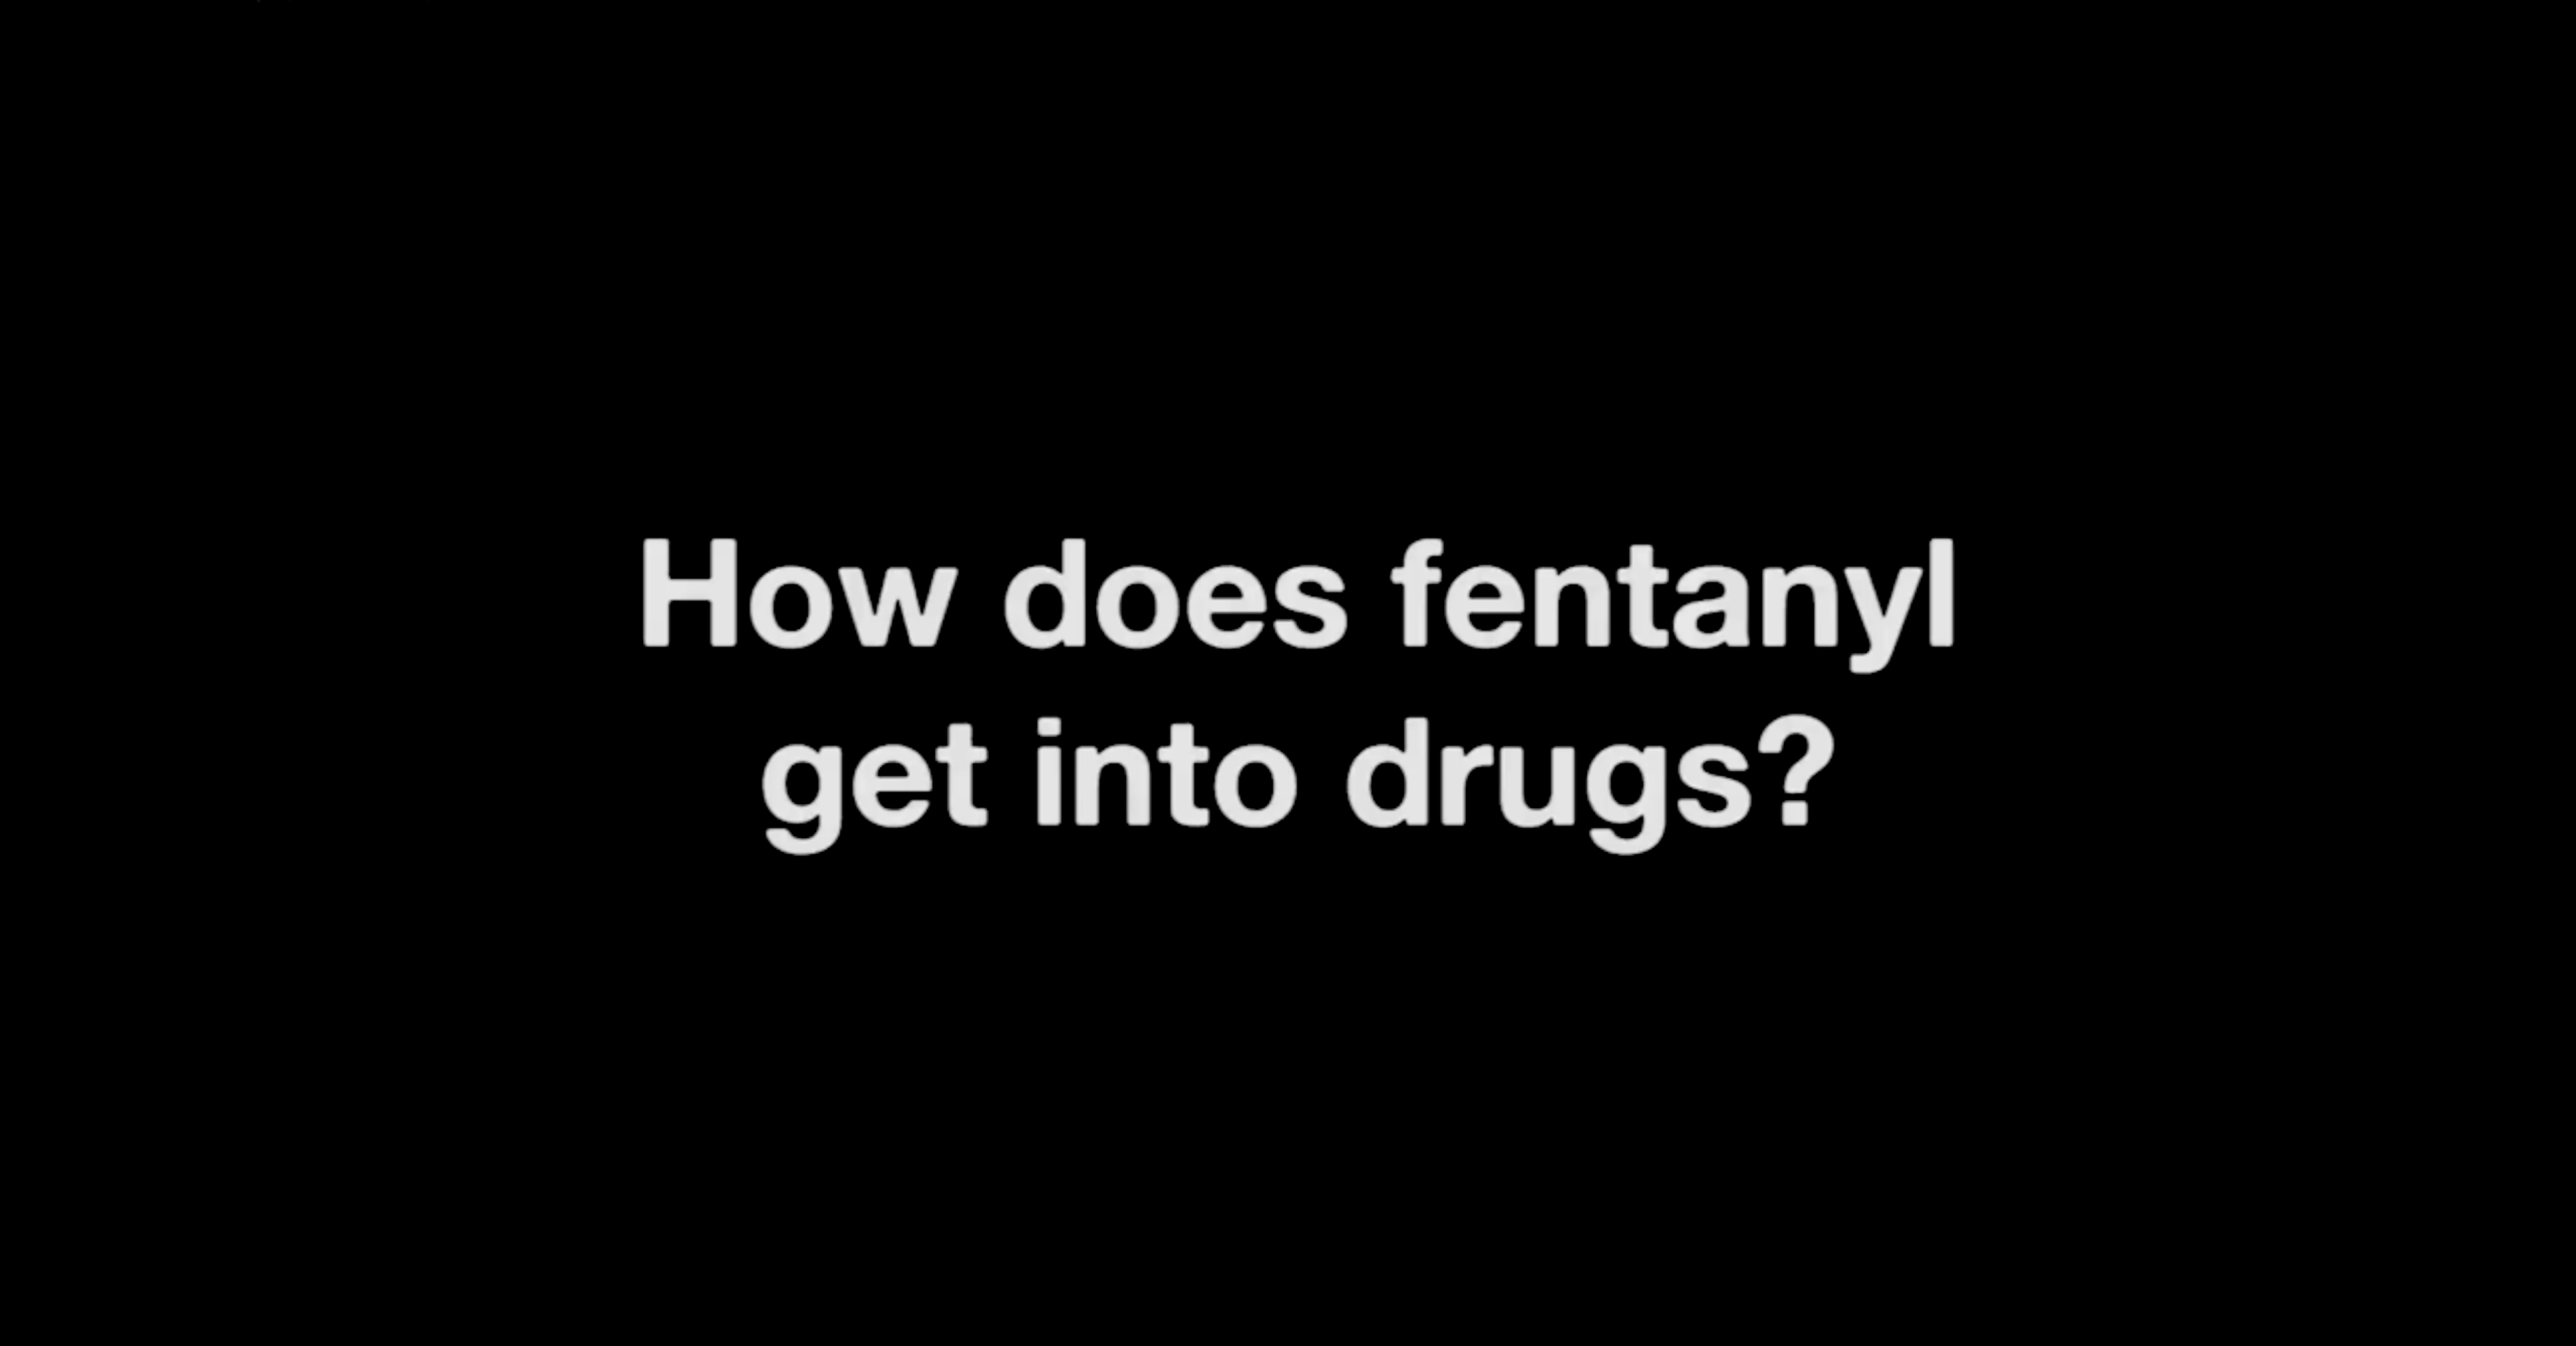 How does fentanyl get into drugs?